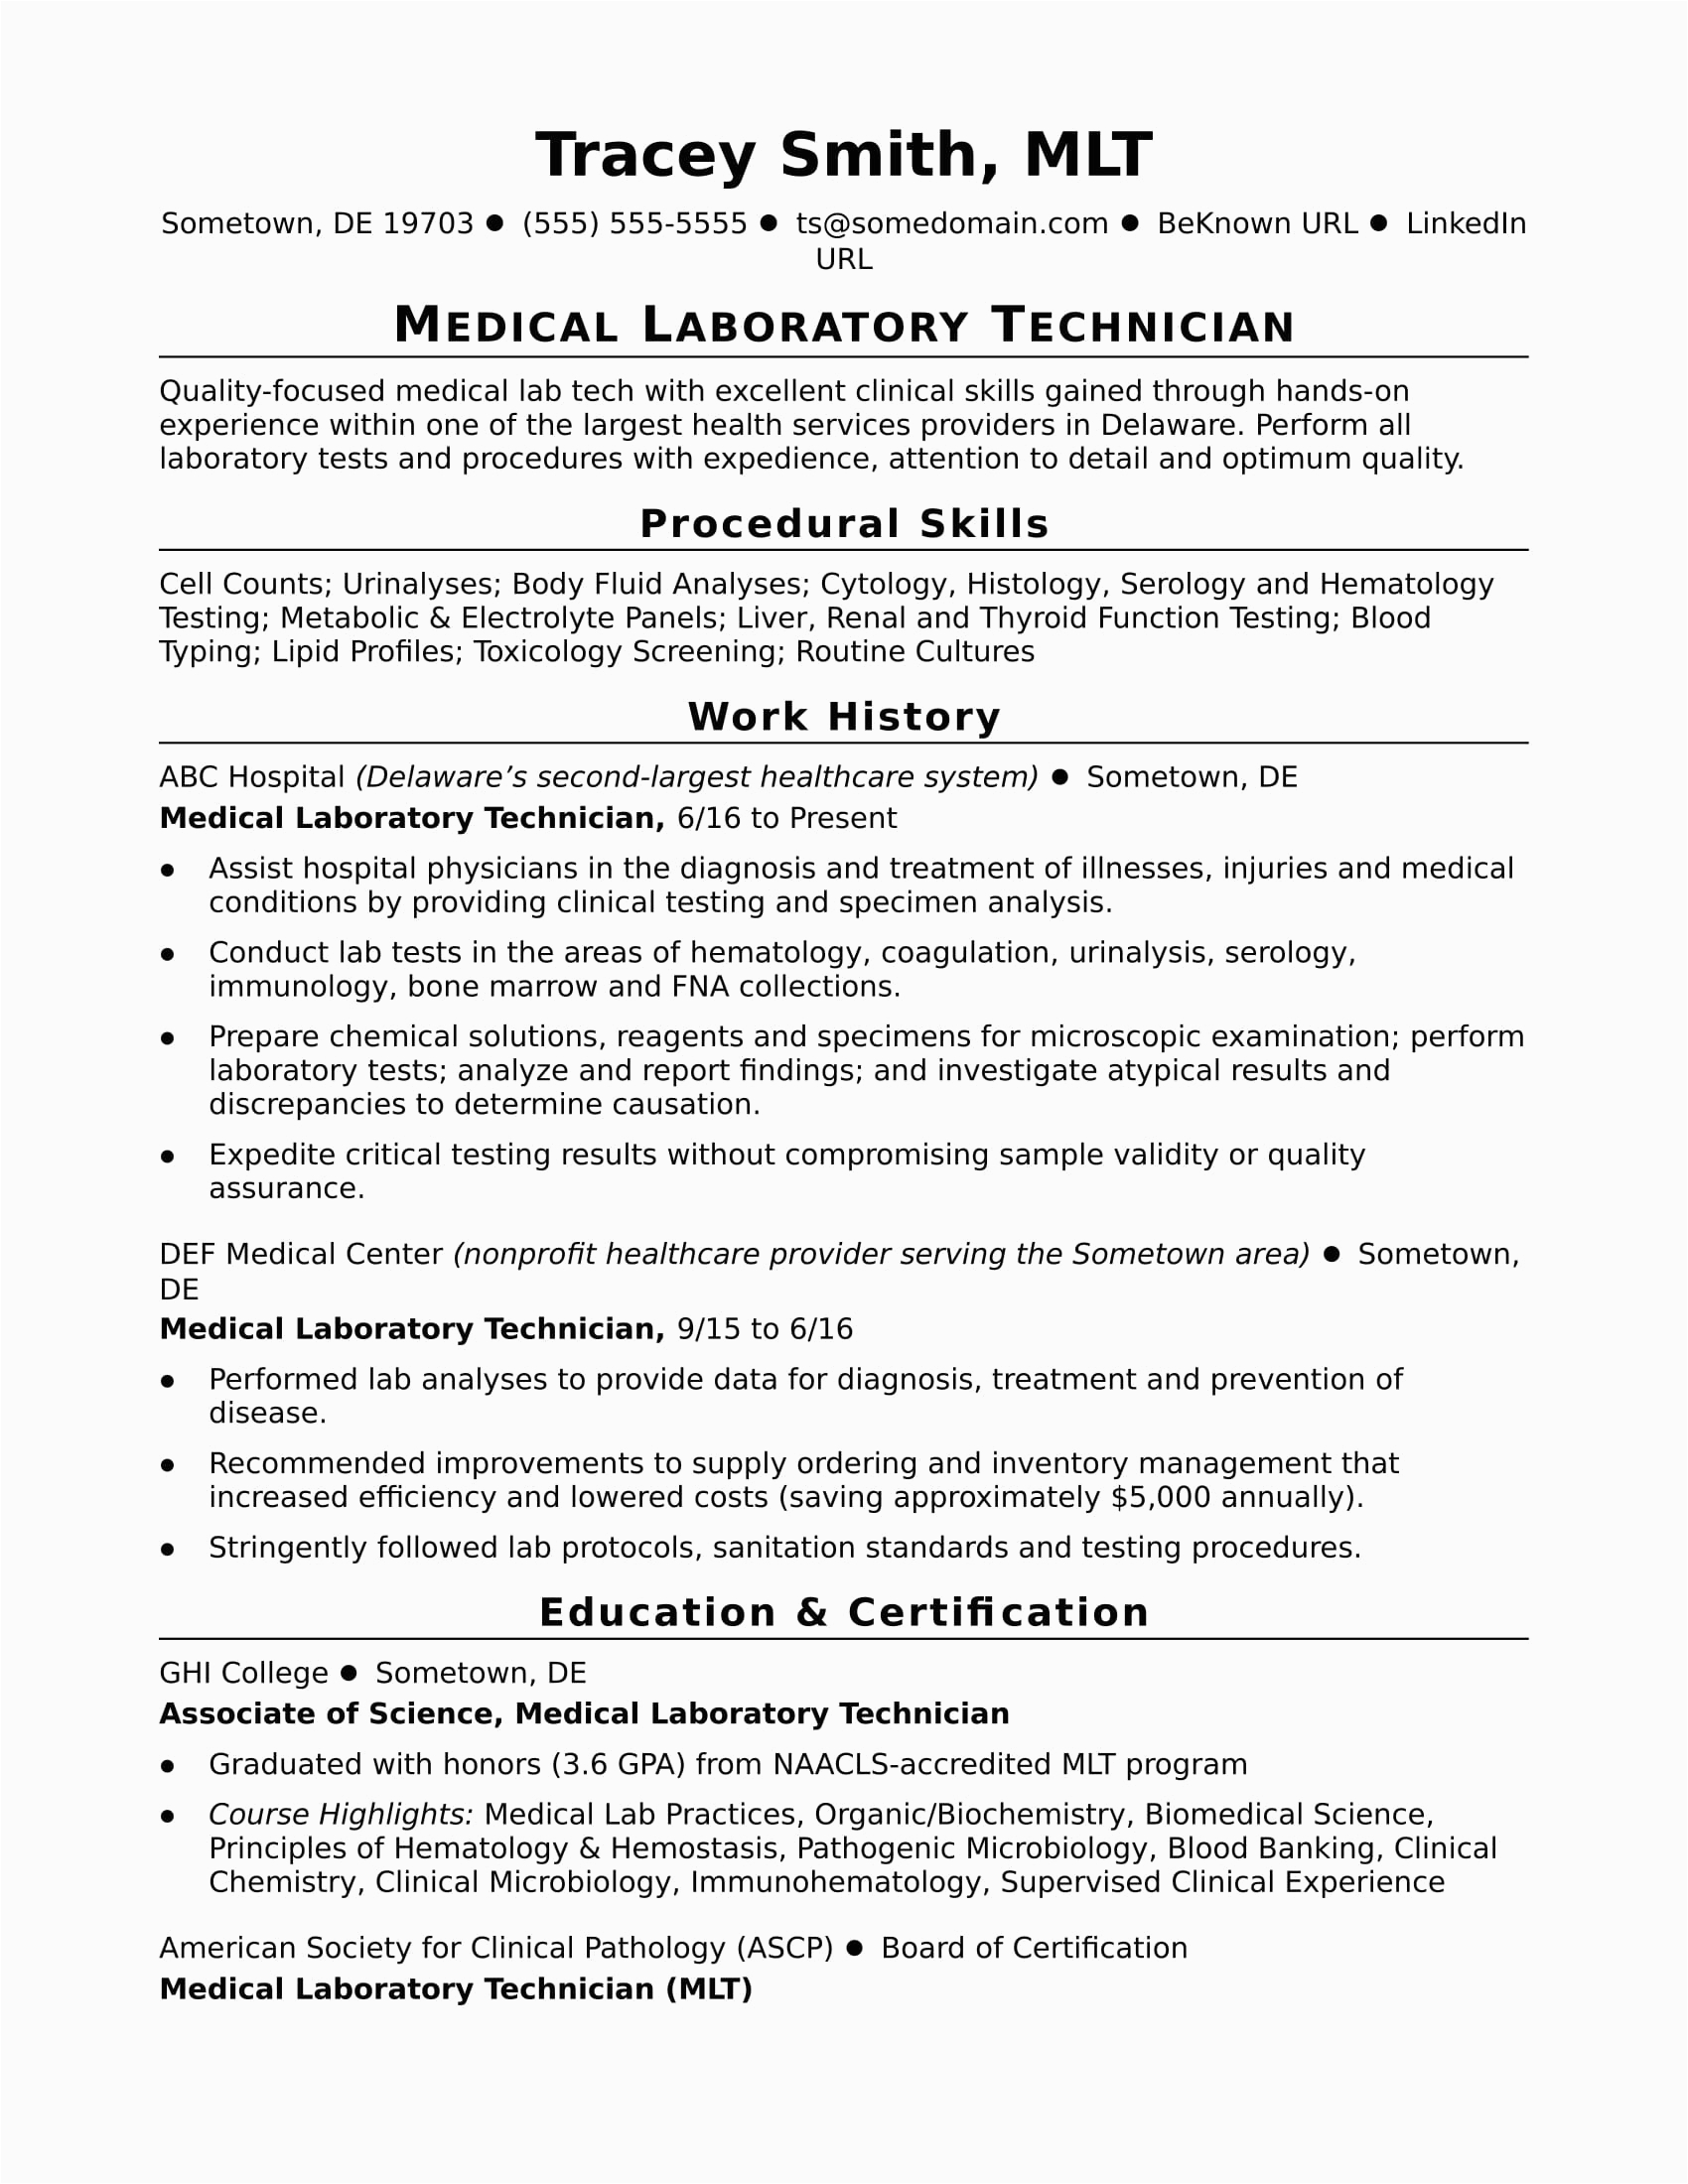 Surgical Tech Resume Sample No Experience Resume for Fresh Graduate Medical Technologist without